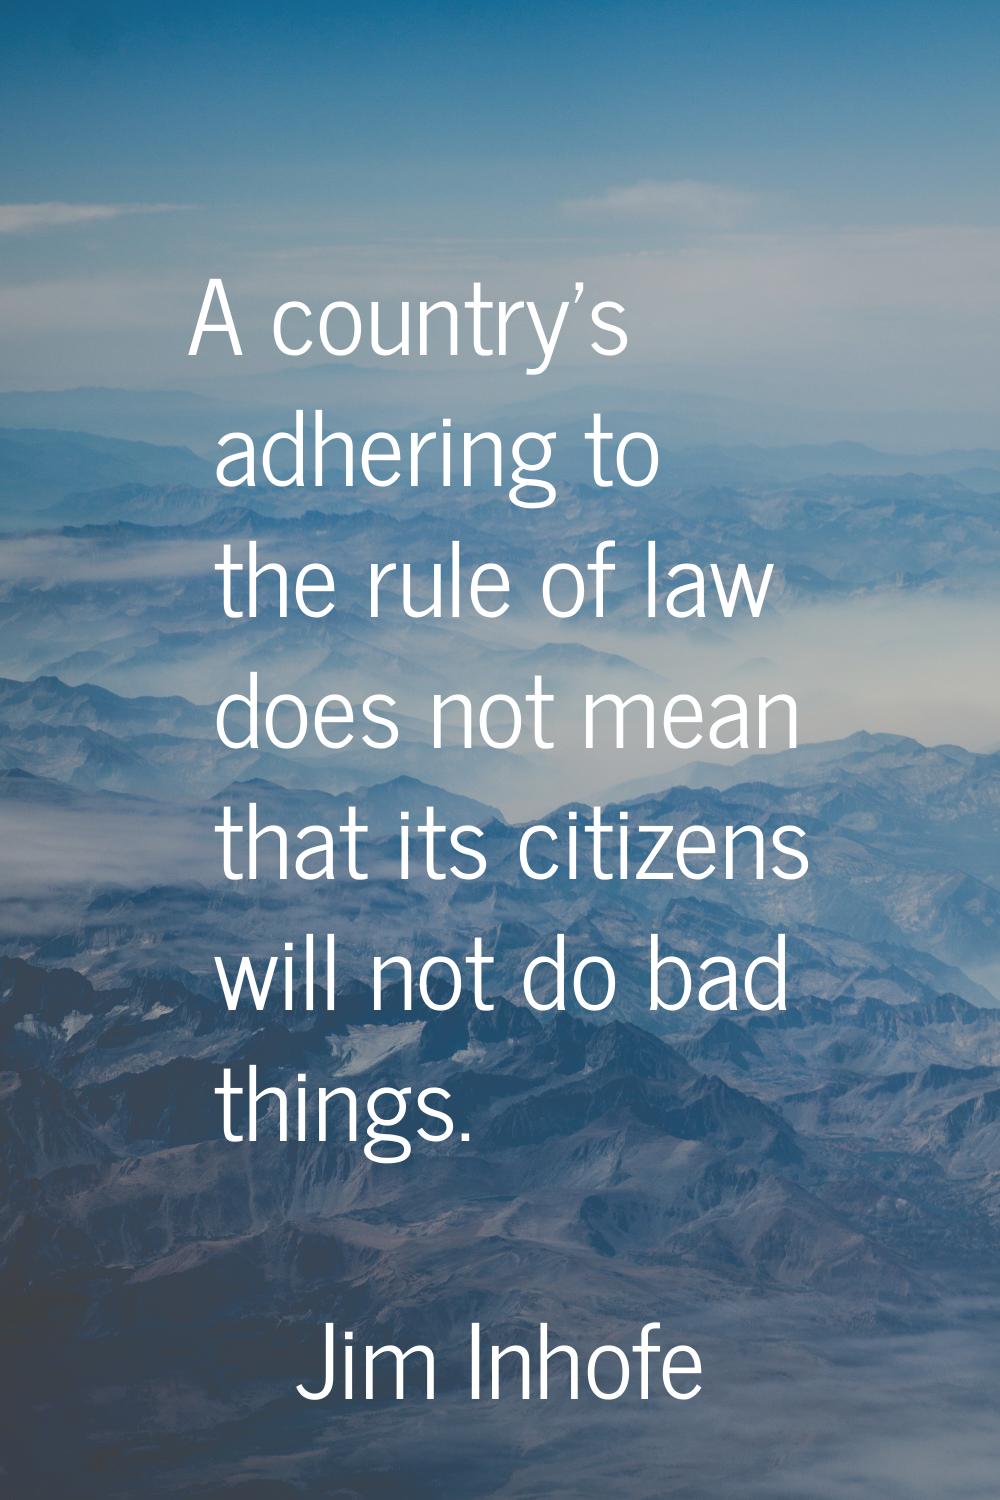 A country's adhering to the rule of law does not mean that its citizens will not do bad things.